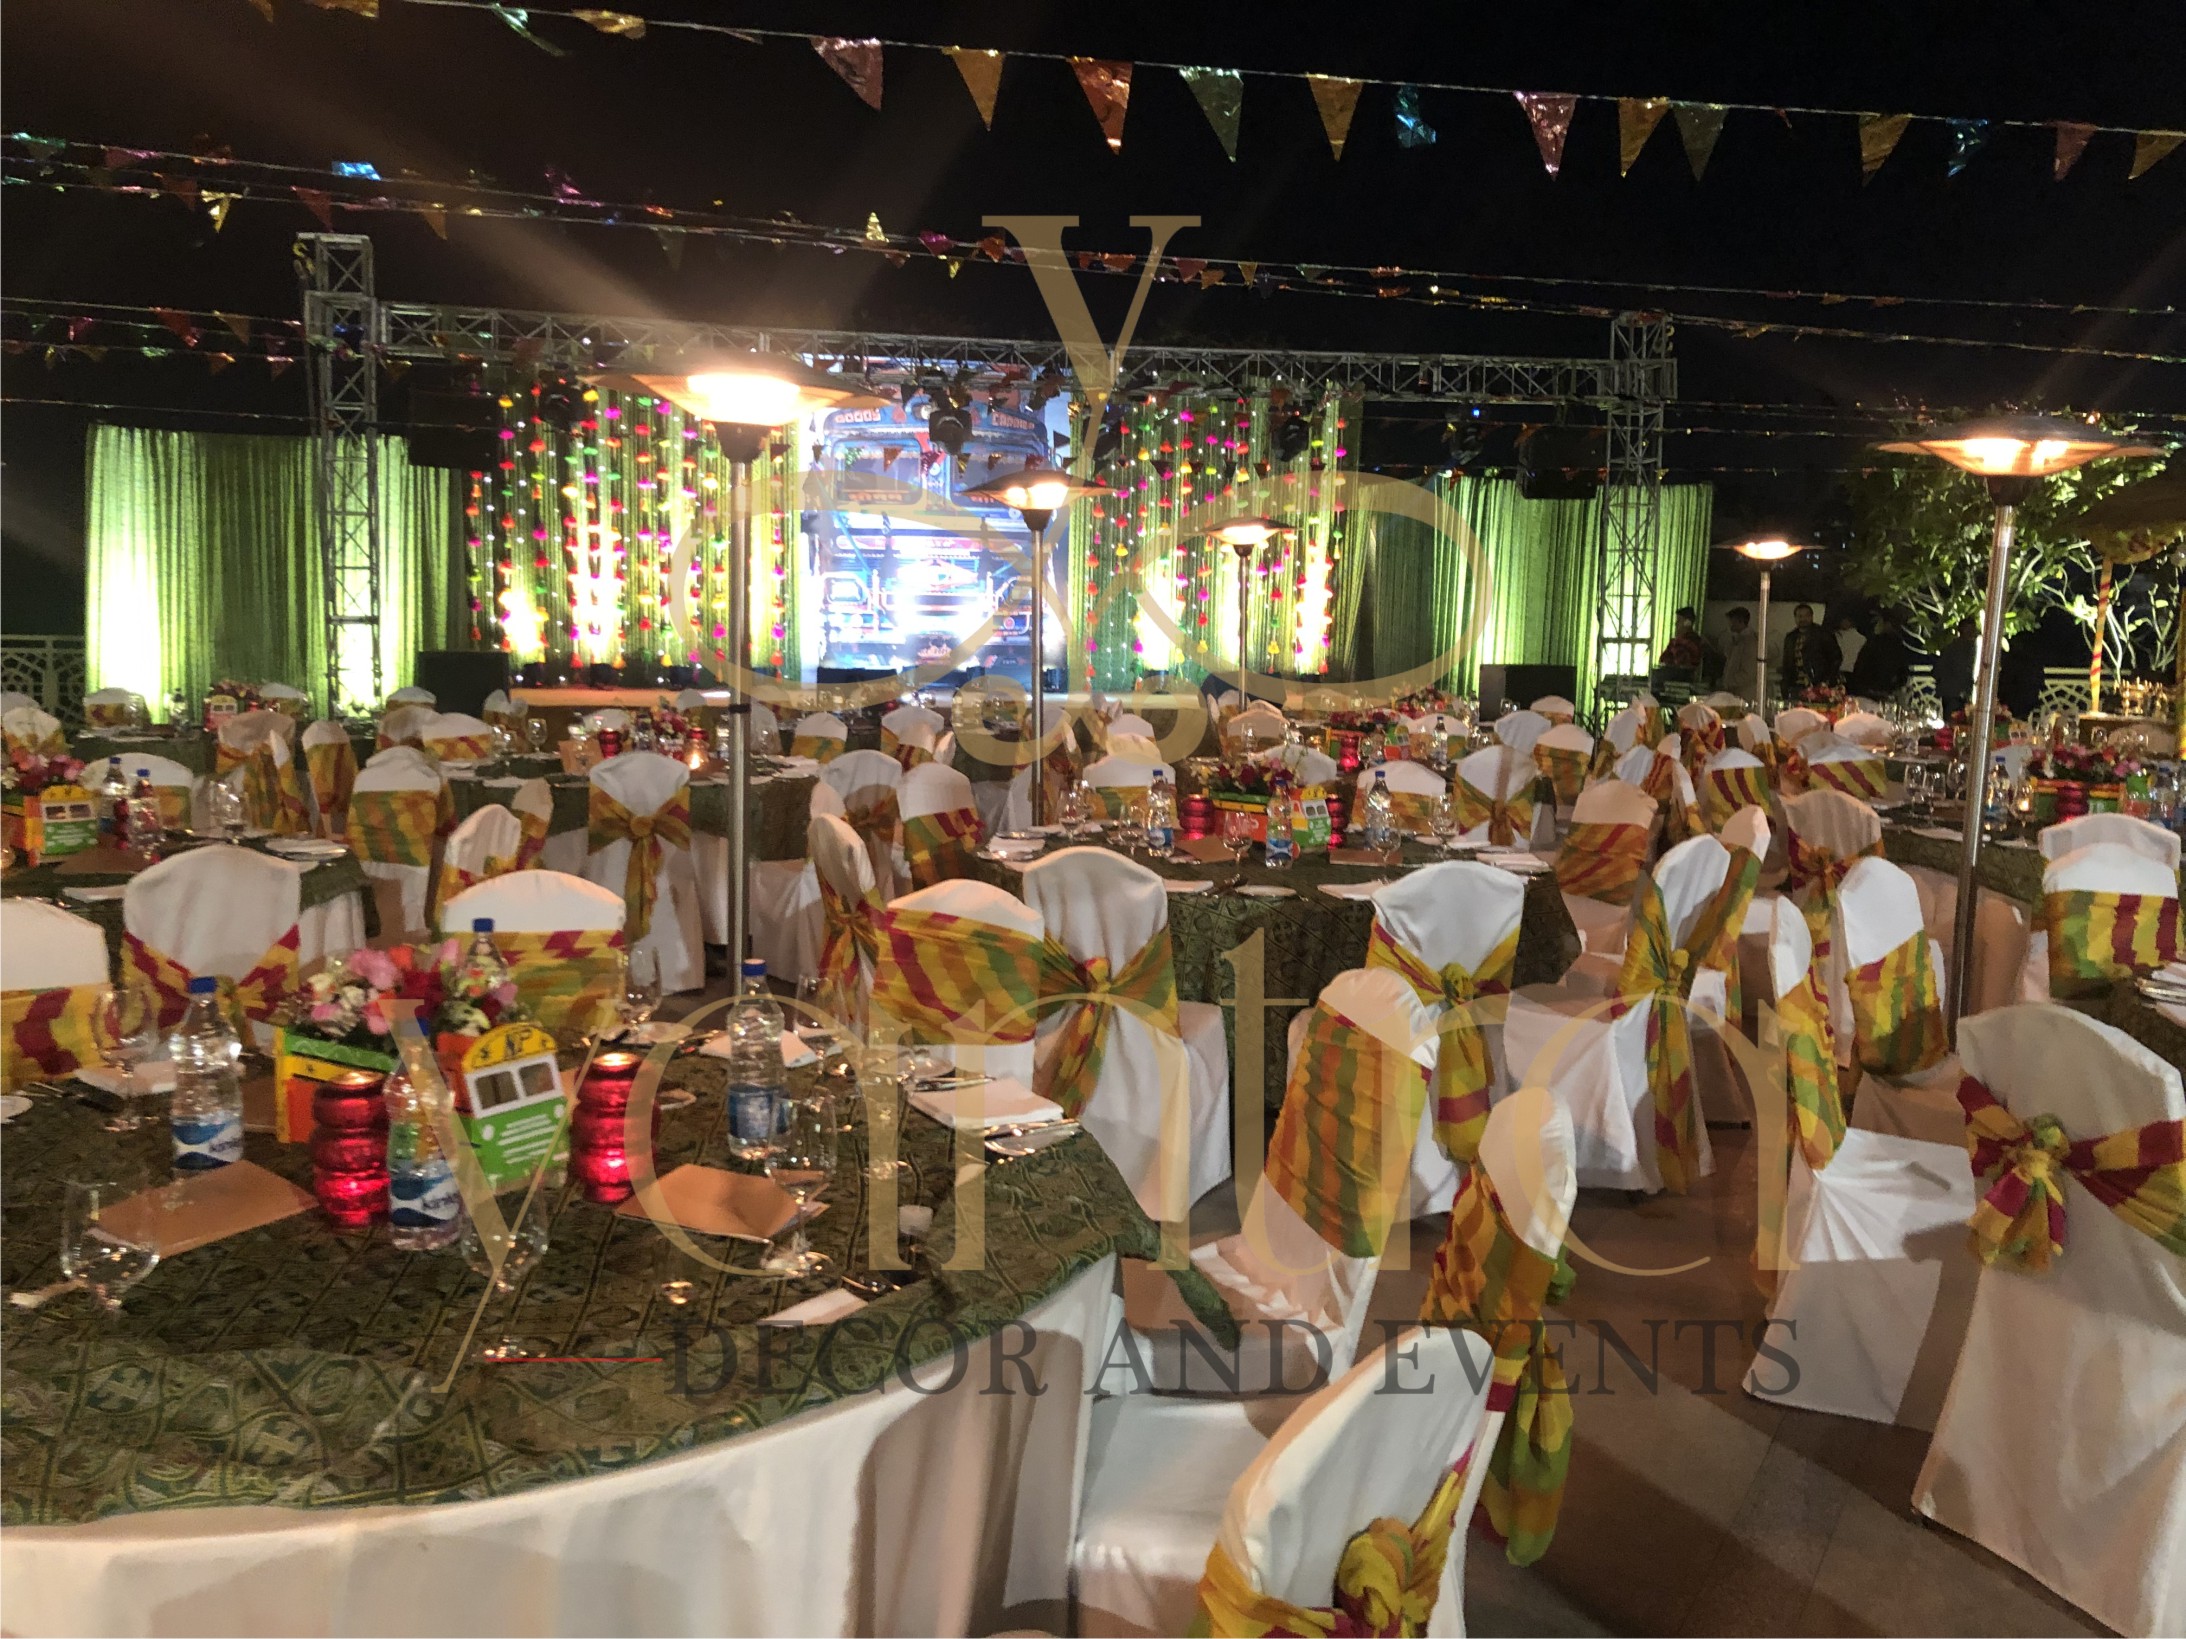 yantra-decor-events-theme-party-image-formal-party-dining-setup